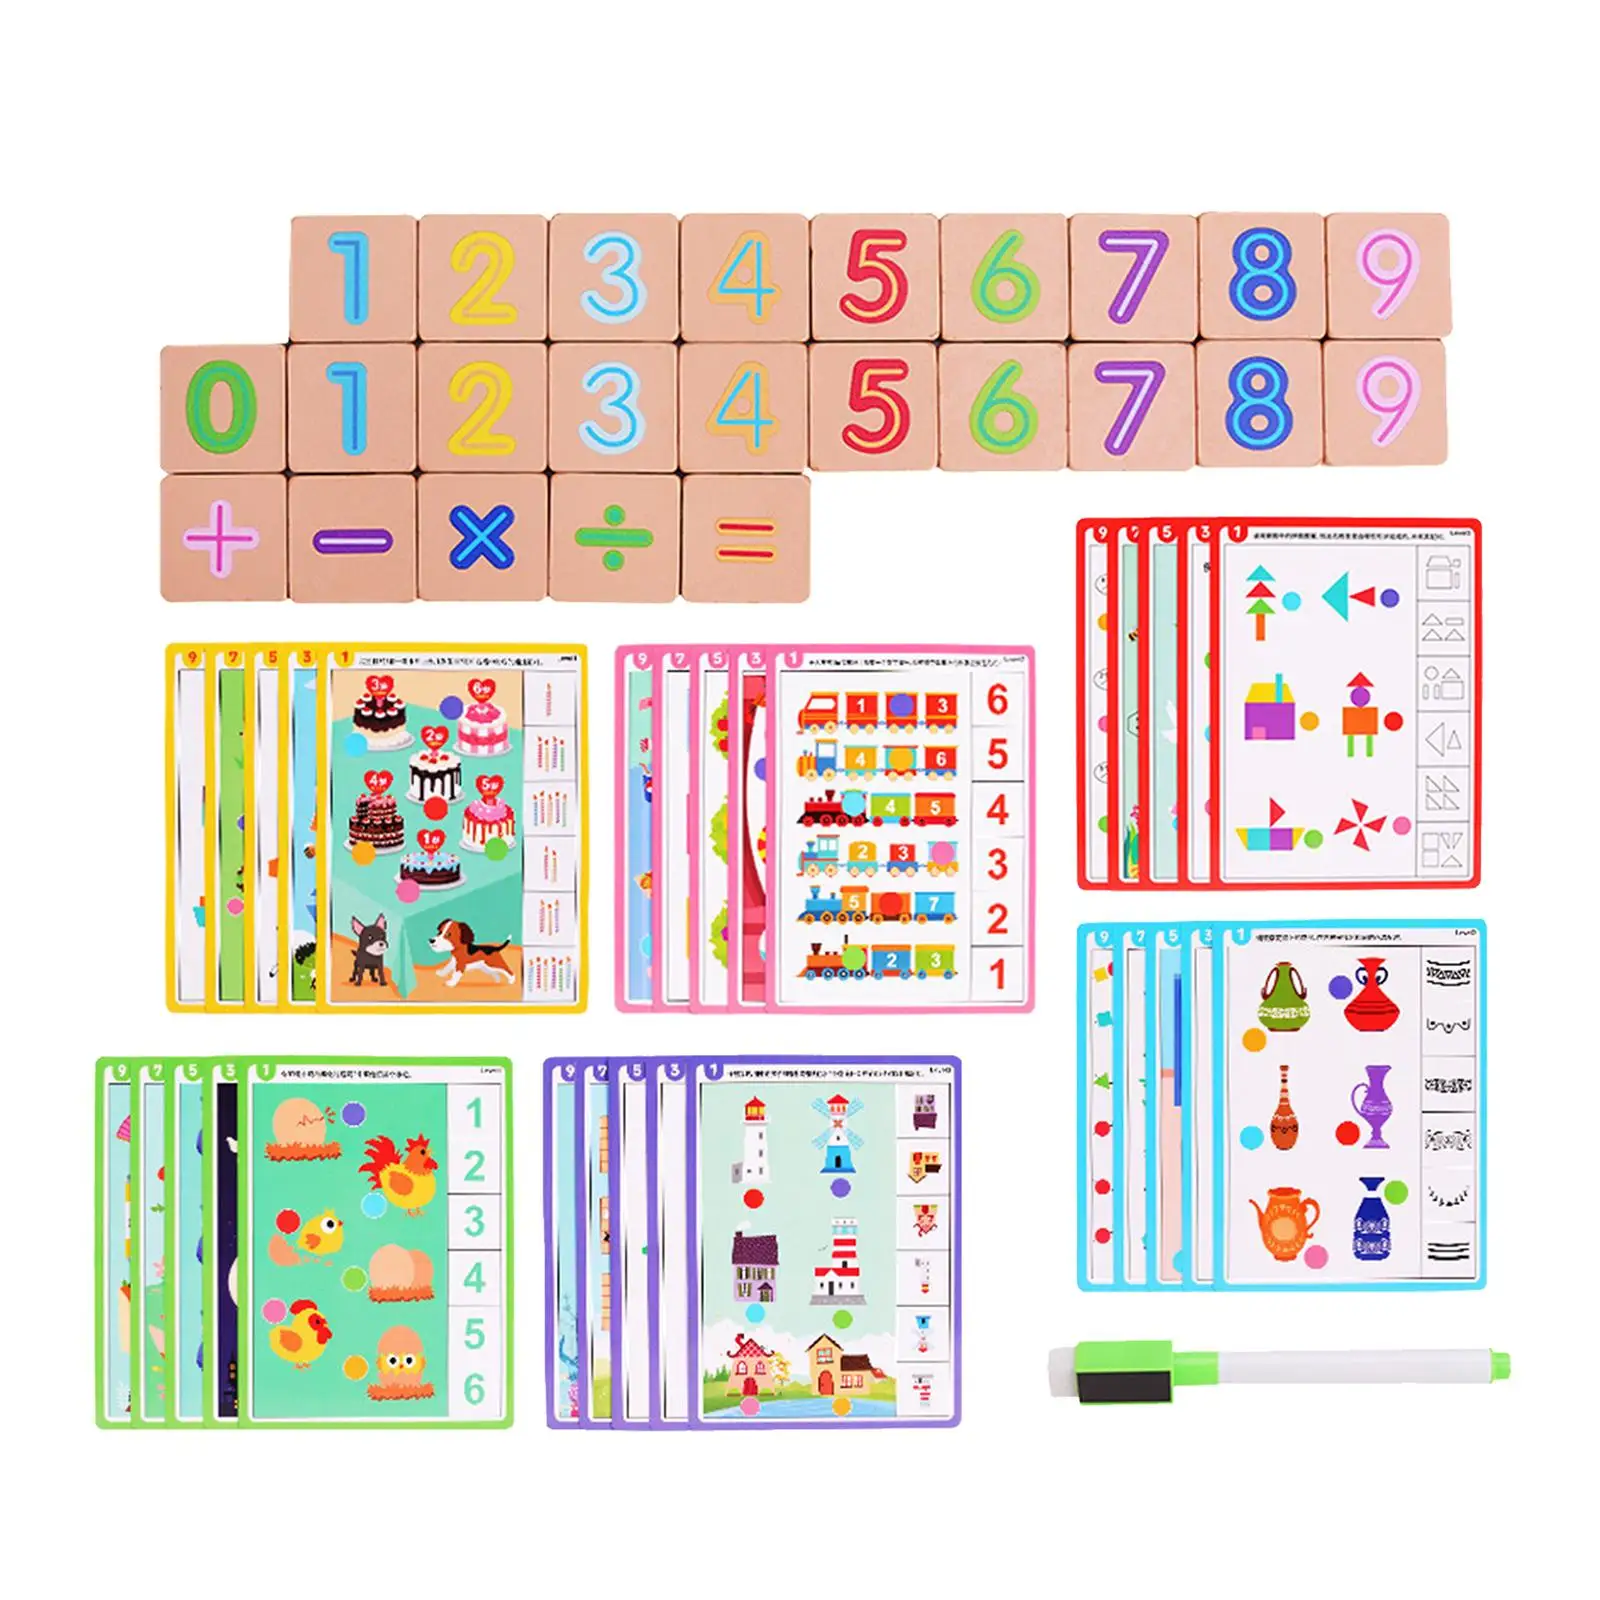 Montessori Learning Toys Slide Puzzle Preschool Educational Toys Color and Shape Matching Brain Teasers Logic Game for Child